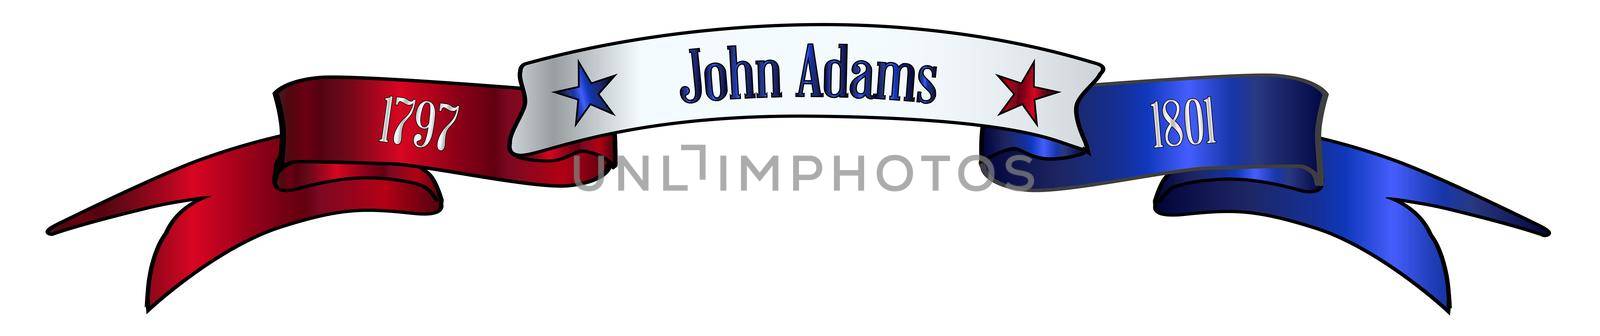 A red white and blue satin or silk ribbon banner with the text John Adams and stars and date in office